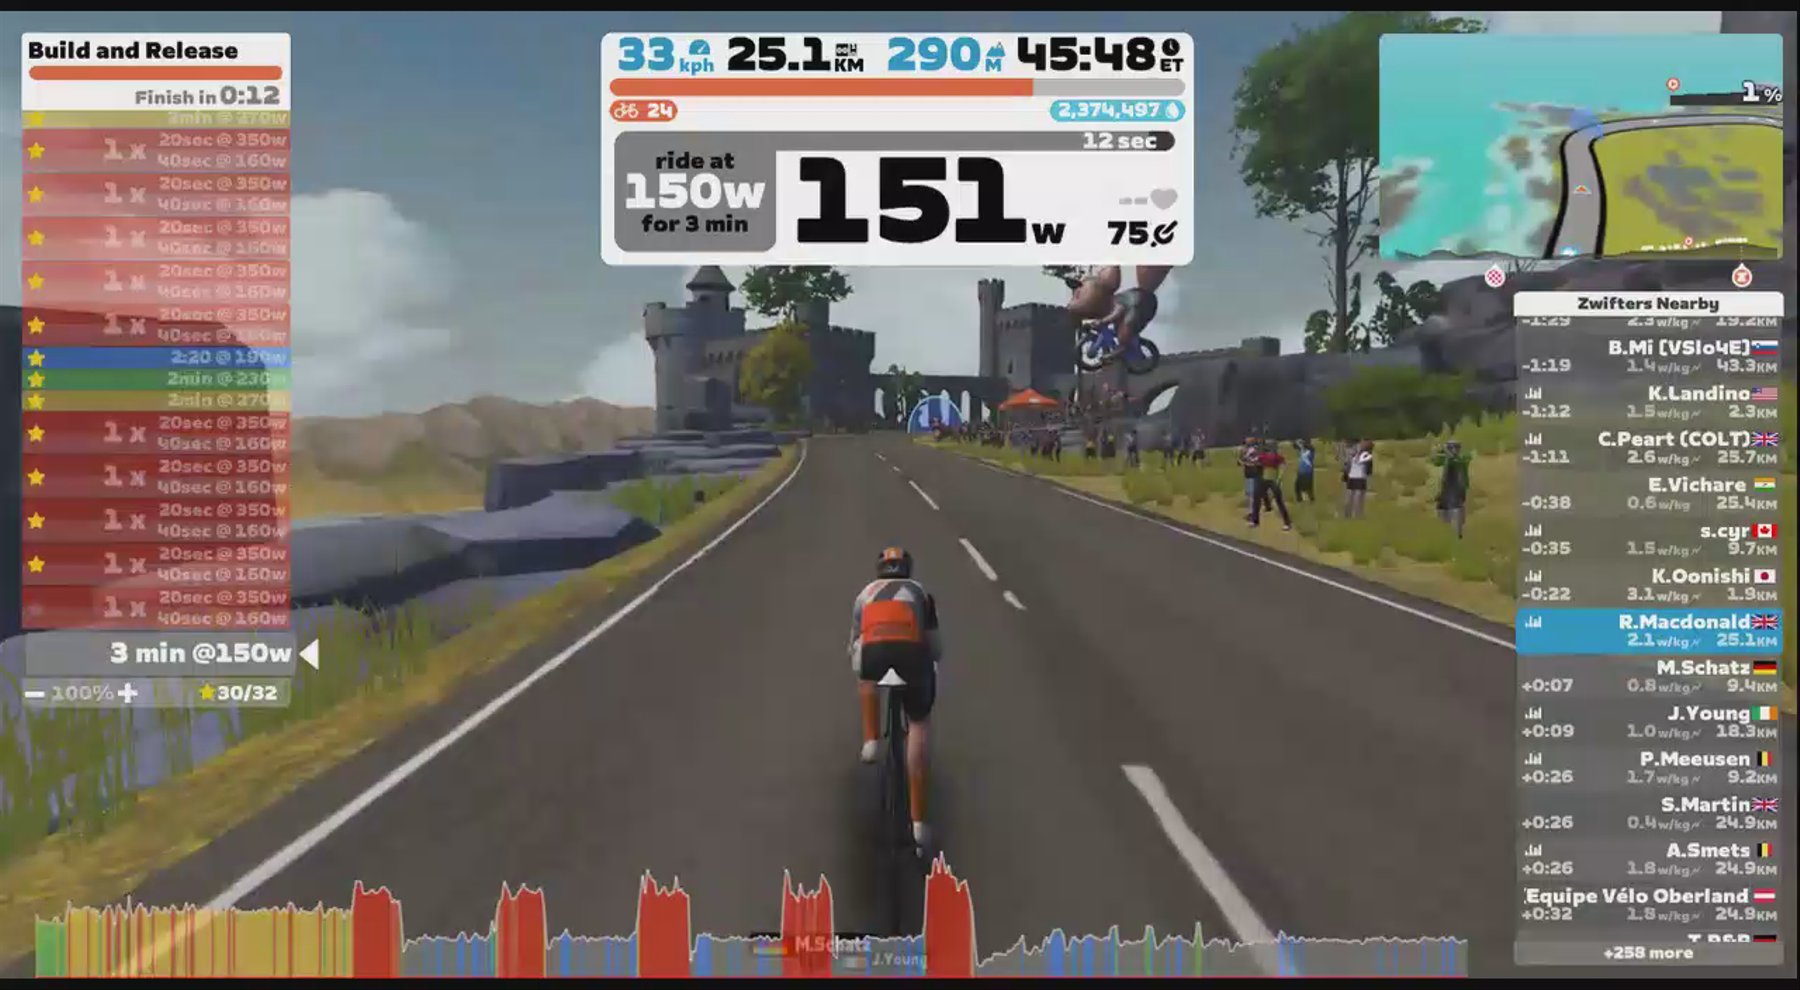 Zwift - Workout of the Week | Build and Release in Scotland